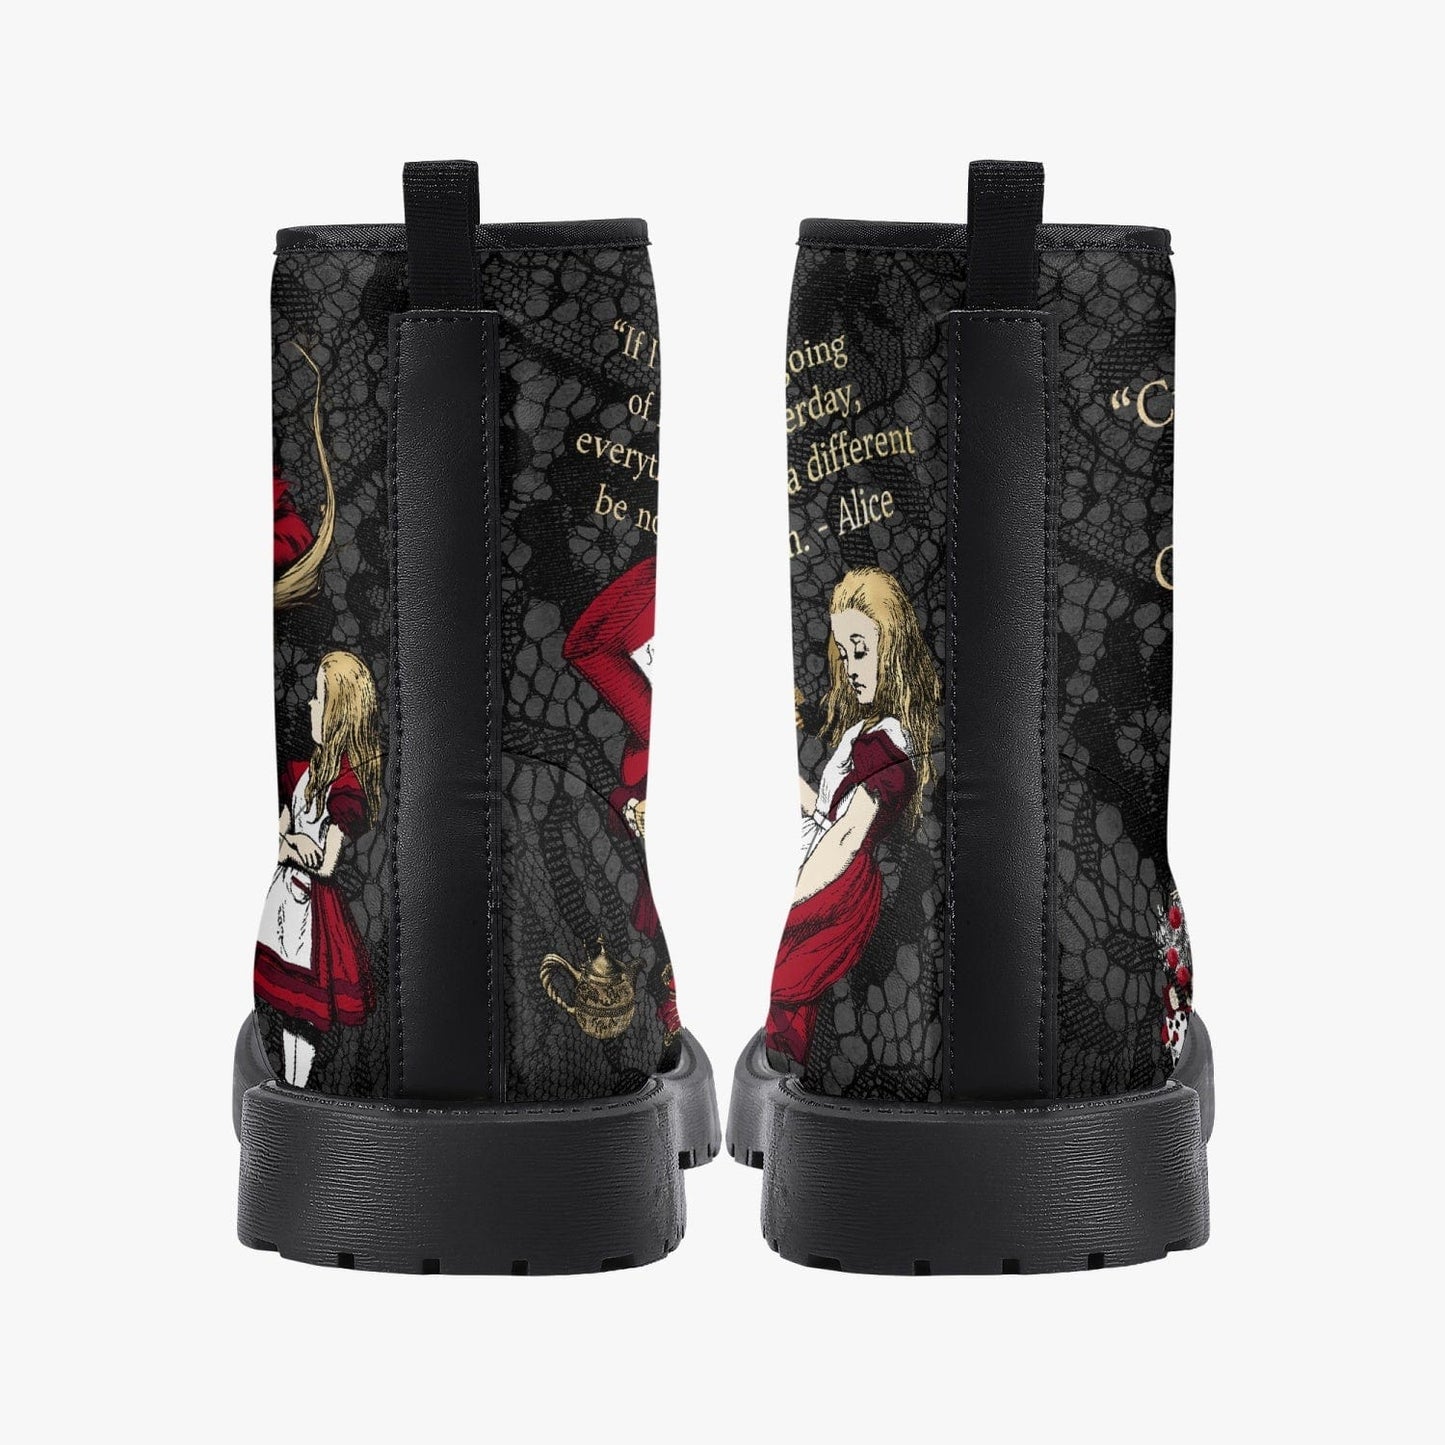 back view of the gothic black gold and red vegan boots featuring Alice in Wonderland quotes